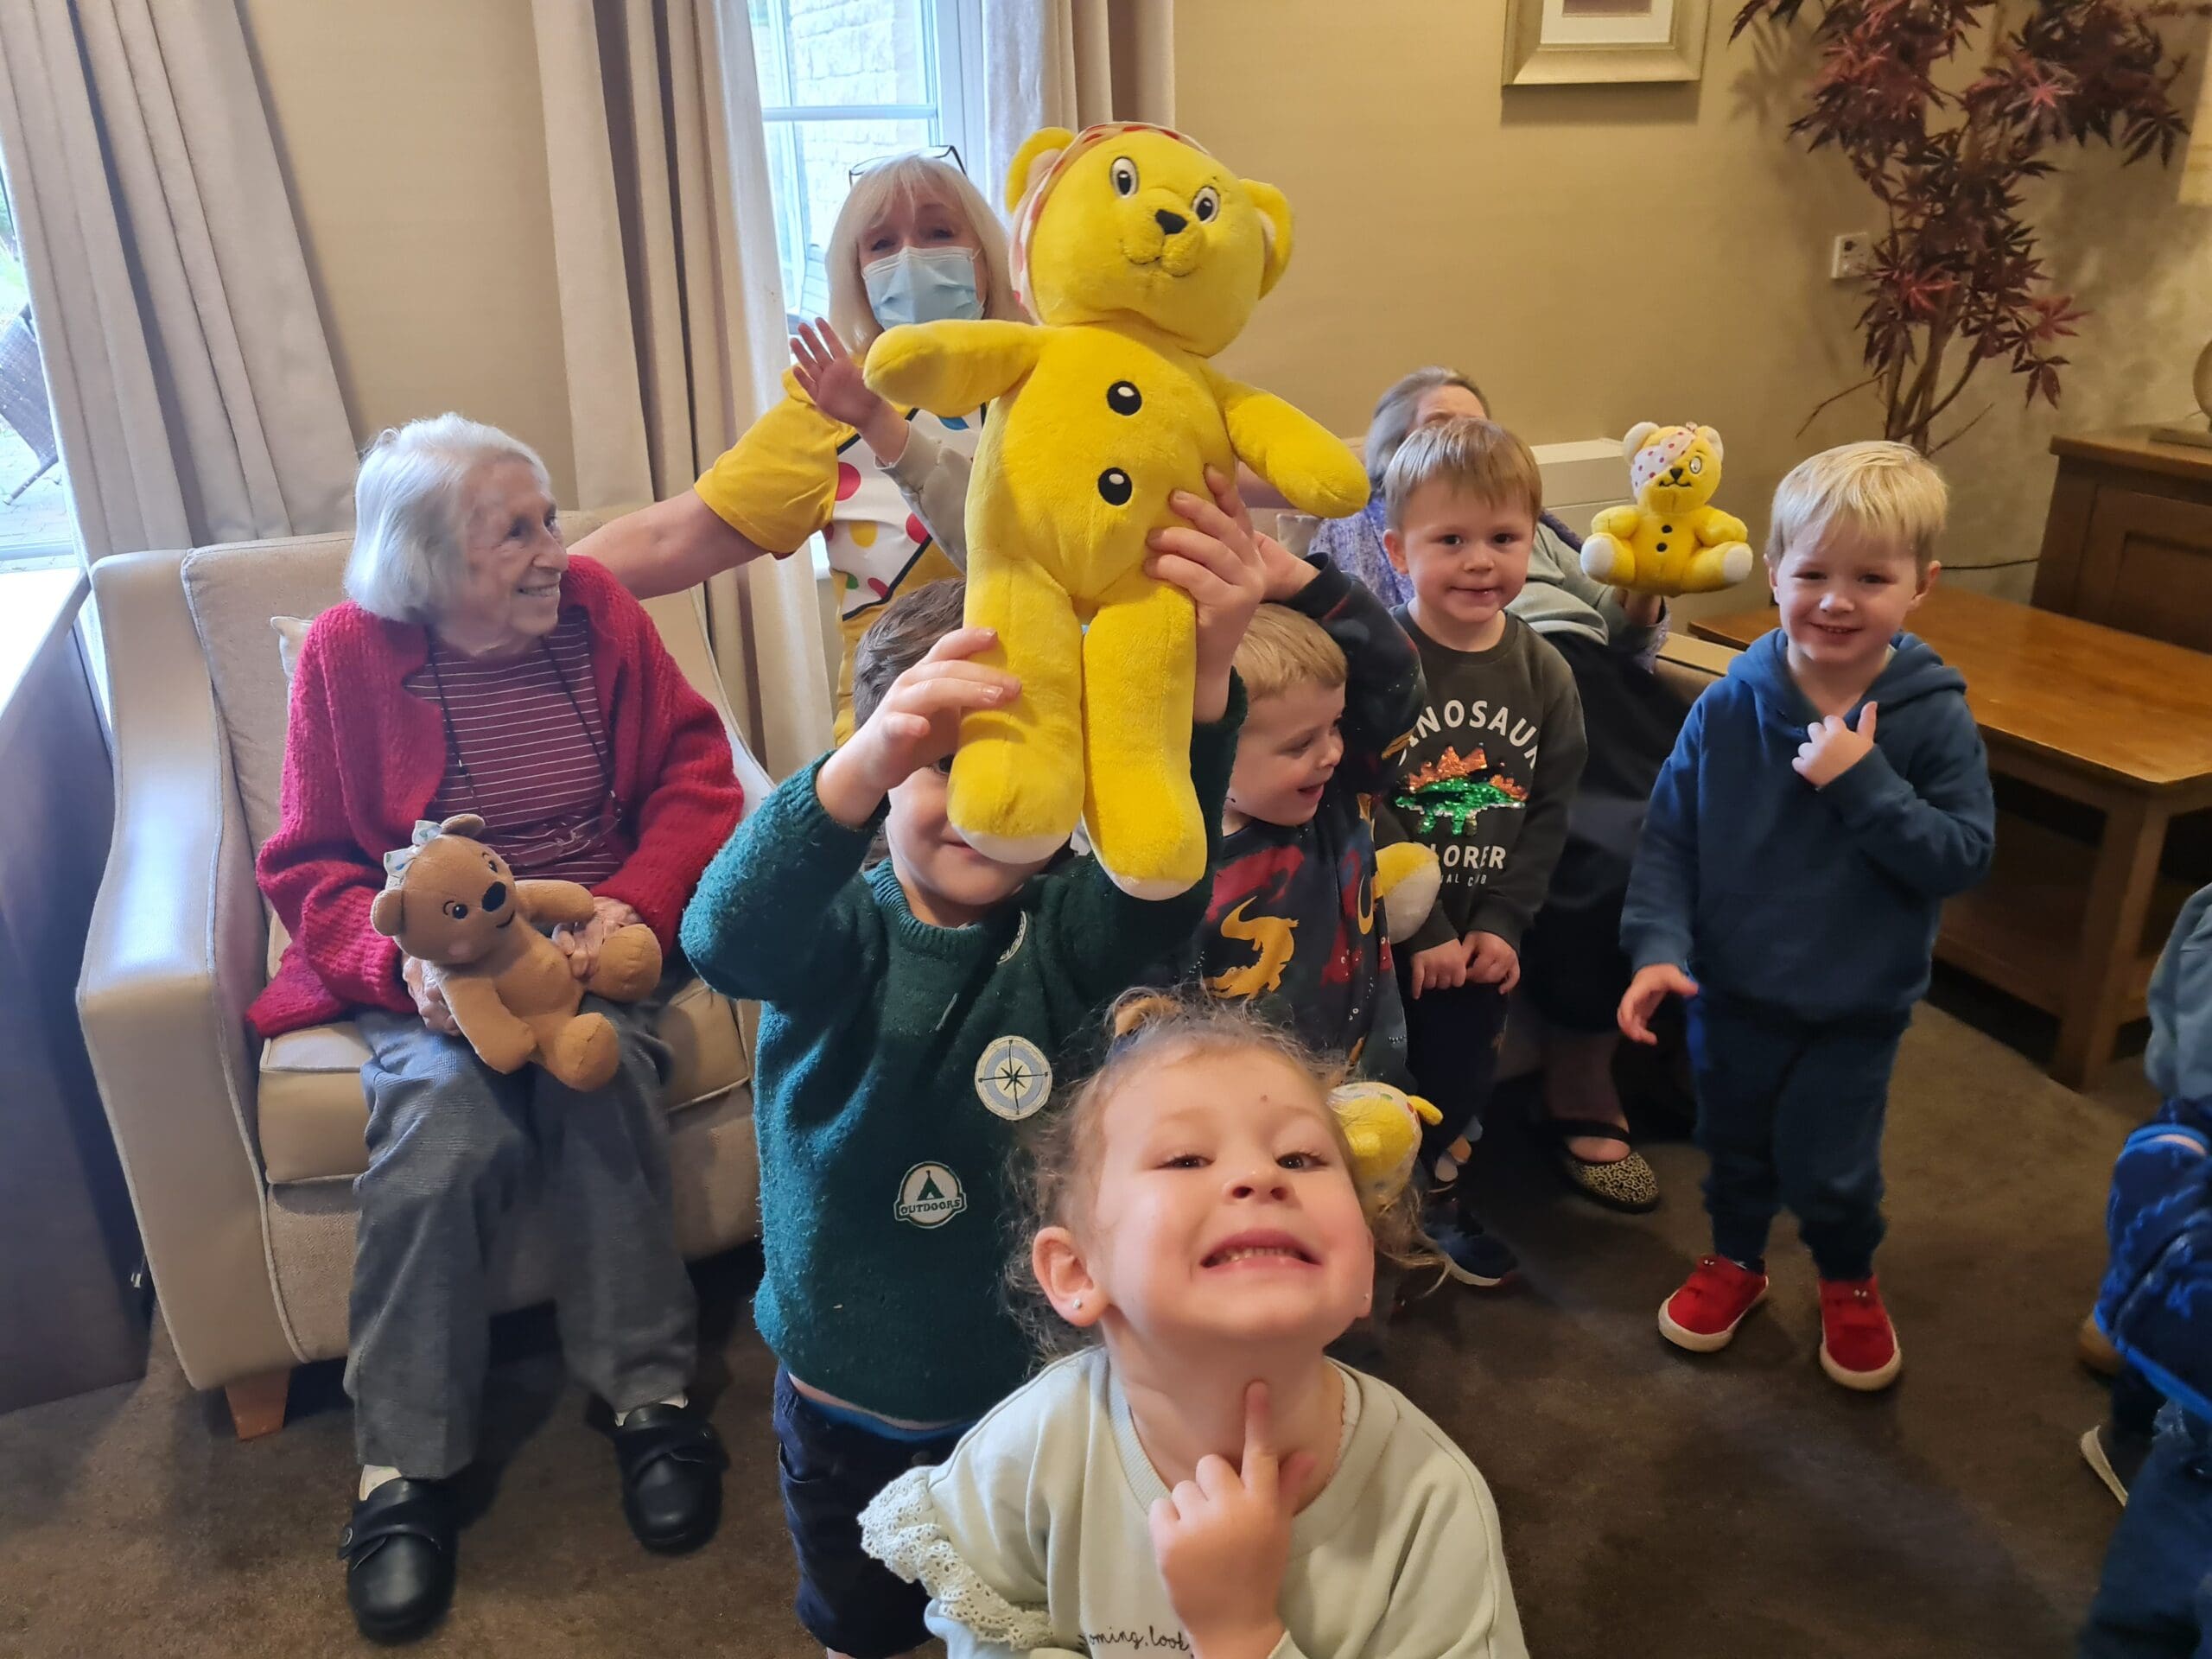 Our Pudsey Bear Visitors